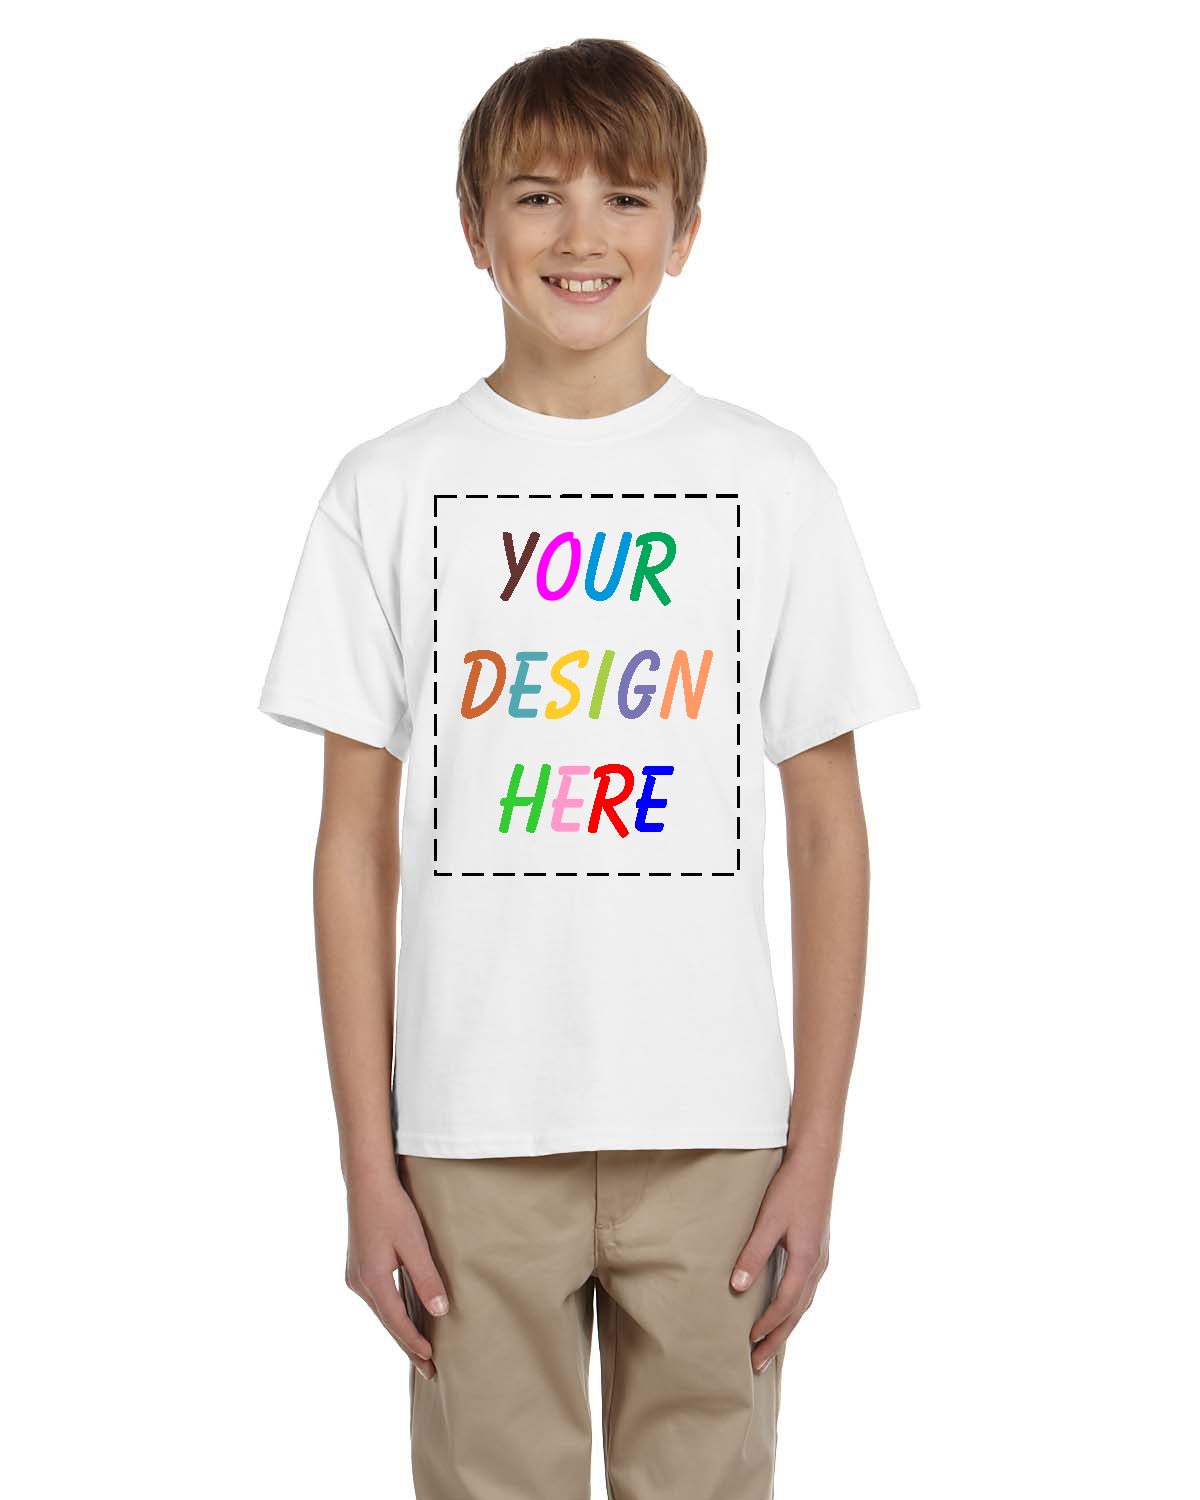 Same Business Day Turnaround (order by 10am) - Full Color DTG Printing on White - Gildan G200B Youth Ultra Cotton Custom T-shirt